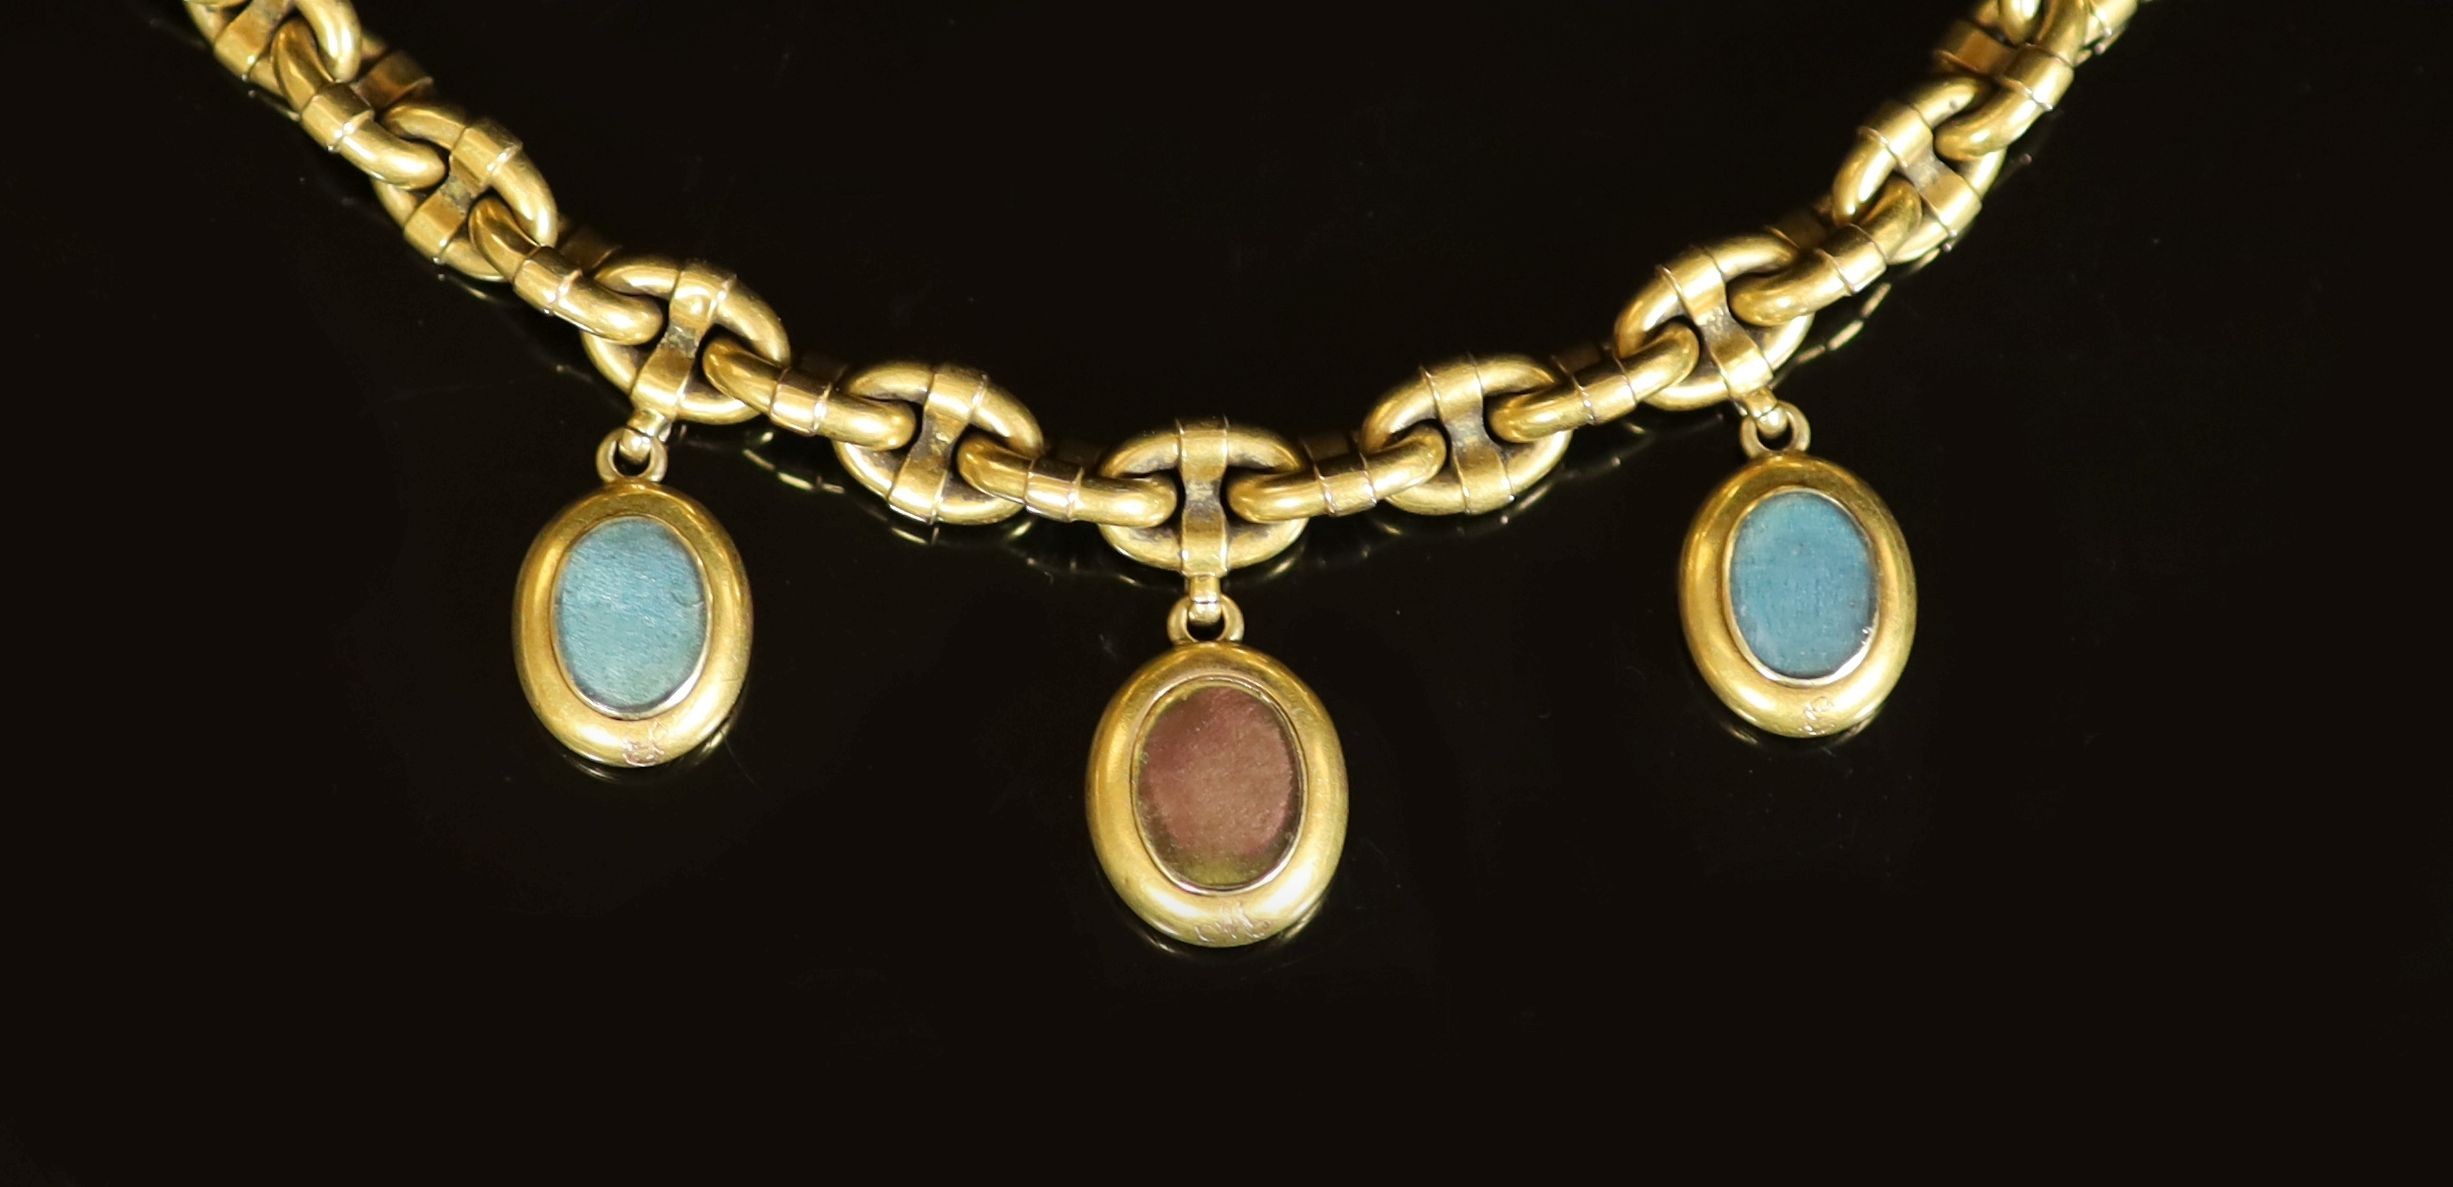 A Victorian gold oval link memorial bracelet, hung with three engraved oval charms, with glazed backs